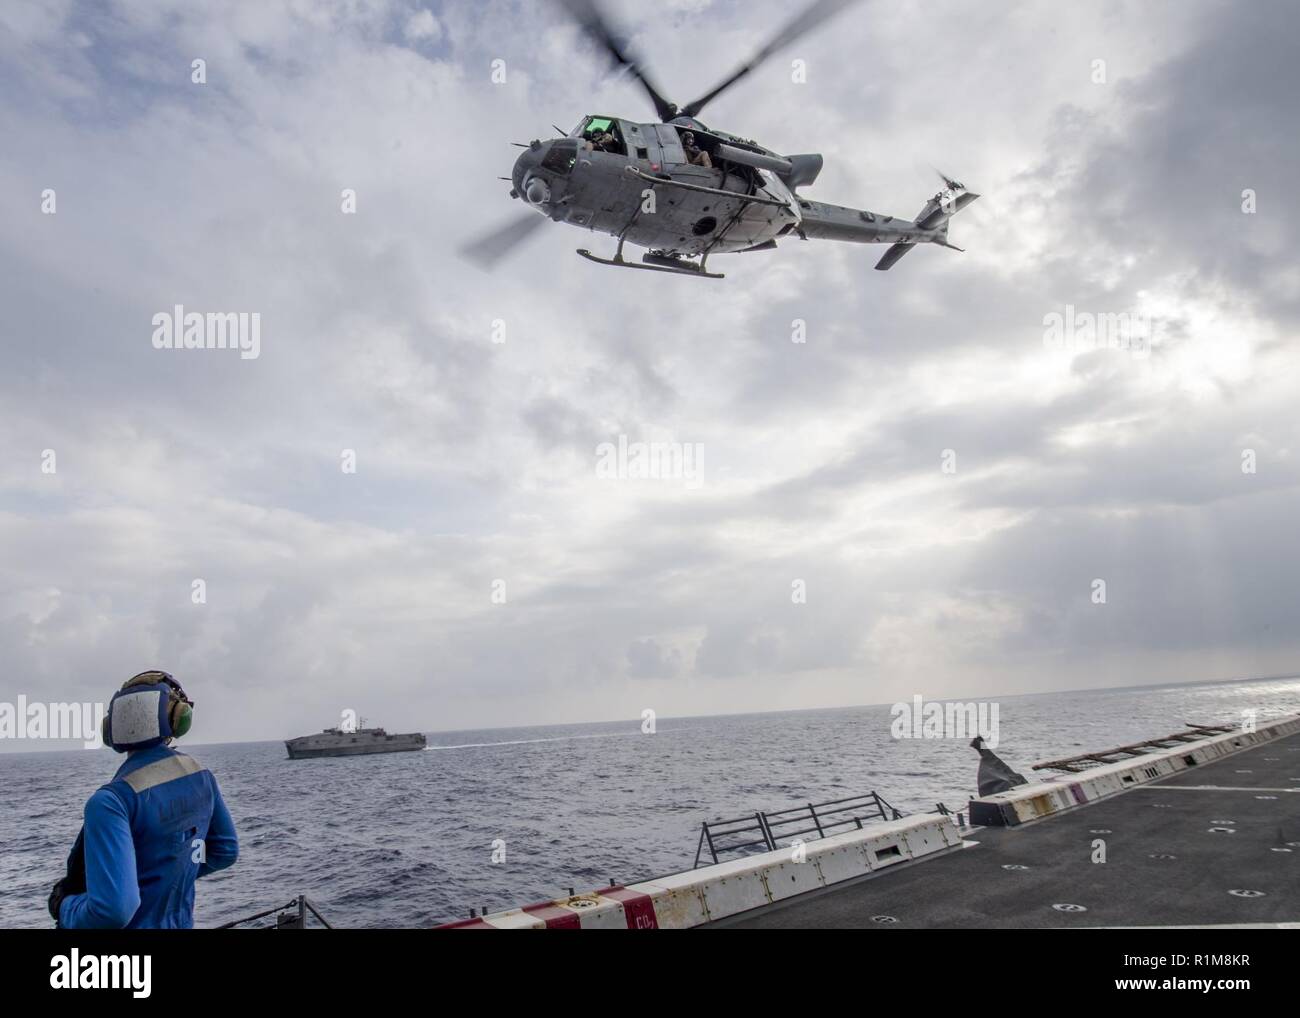 MEDITERRANEAN SEA (Oct. 20, 2018) Damage Controlman 3rd Class Wayne L. Batten, watches a UH-1Y Venom helicopter, attached to Marine Medium Tiltrotor Squadron (VMM) 166 (Reinforced), take off from the flight deck of the San Antonio-class amphibious transport dock ship USS Anchorage (LPD 23) during flight operations with the Spearhead-class expeditionary fast transport ship USNS Carson City (T-EPF-7) in the Mediterranean Sea, Oct. 20, 2018. Anchorage and embarked 13th Marine Expeditionary Unit are deployed to the U.S. 6th Fleet area of operations as a crisis response force in support of regional Stock Photo